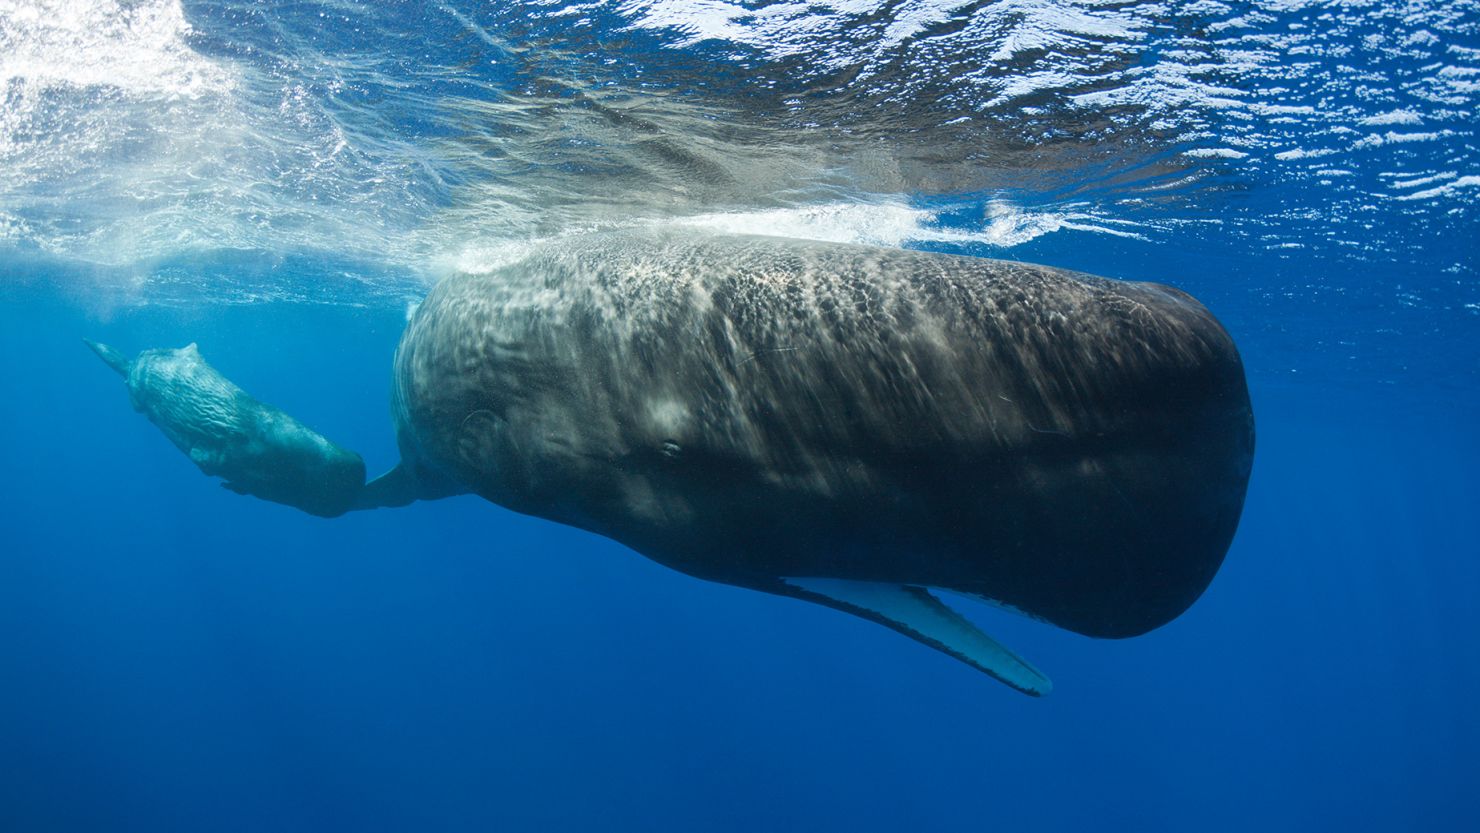 Understanding how sperm whales such as the mother and calf shown above vary their click sequences could help scientists learn how the animals "encode information in their calls," researchers said.